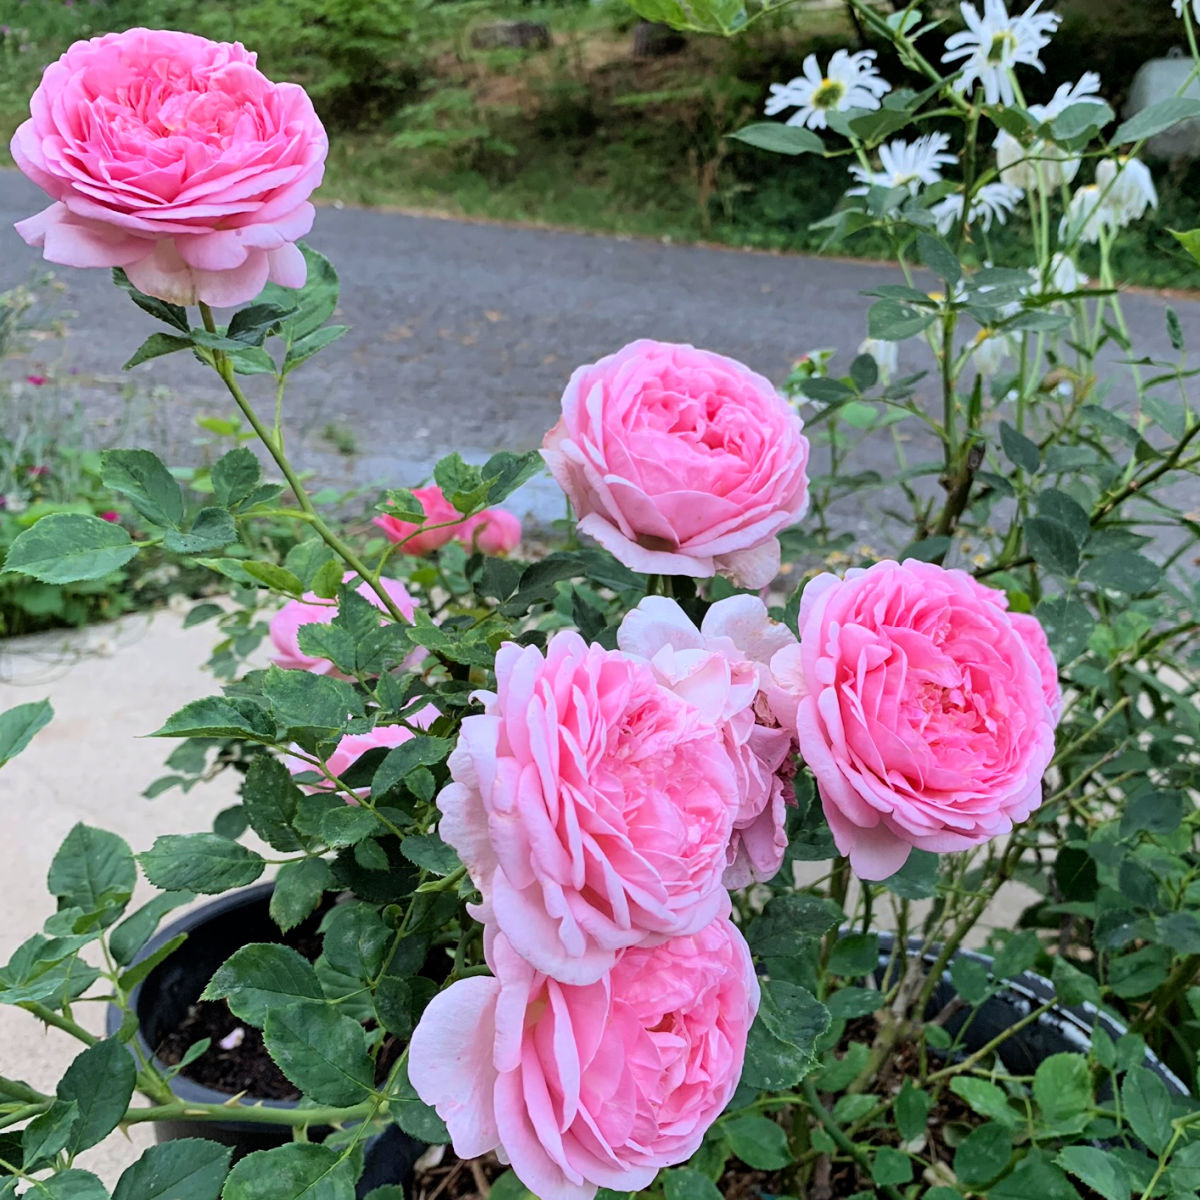 When to Prune Roses